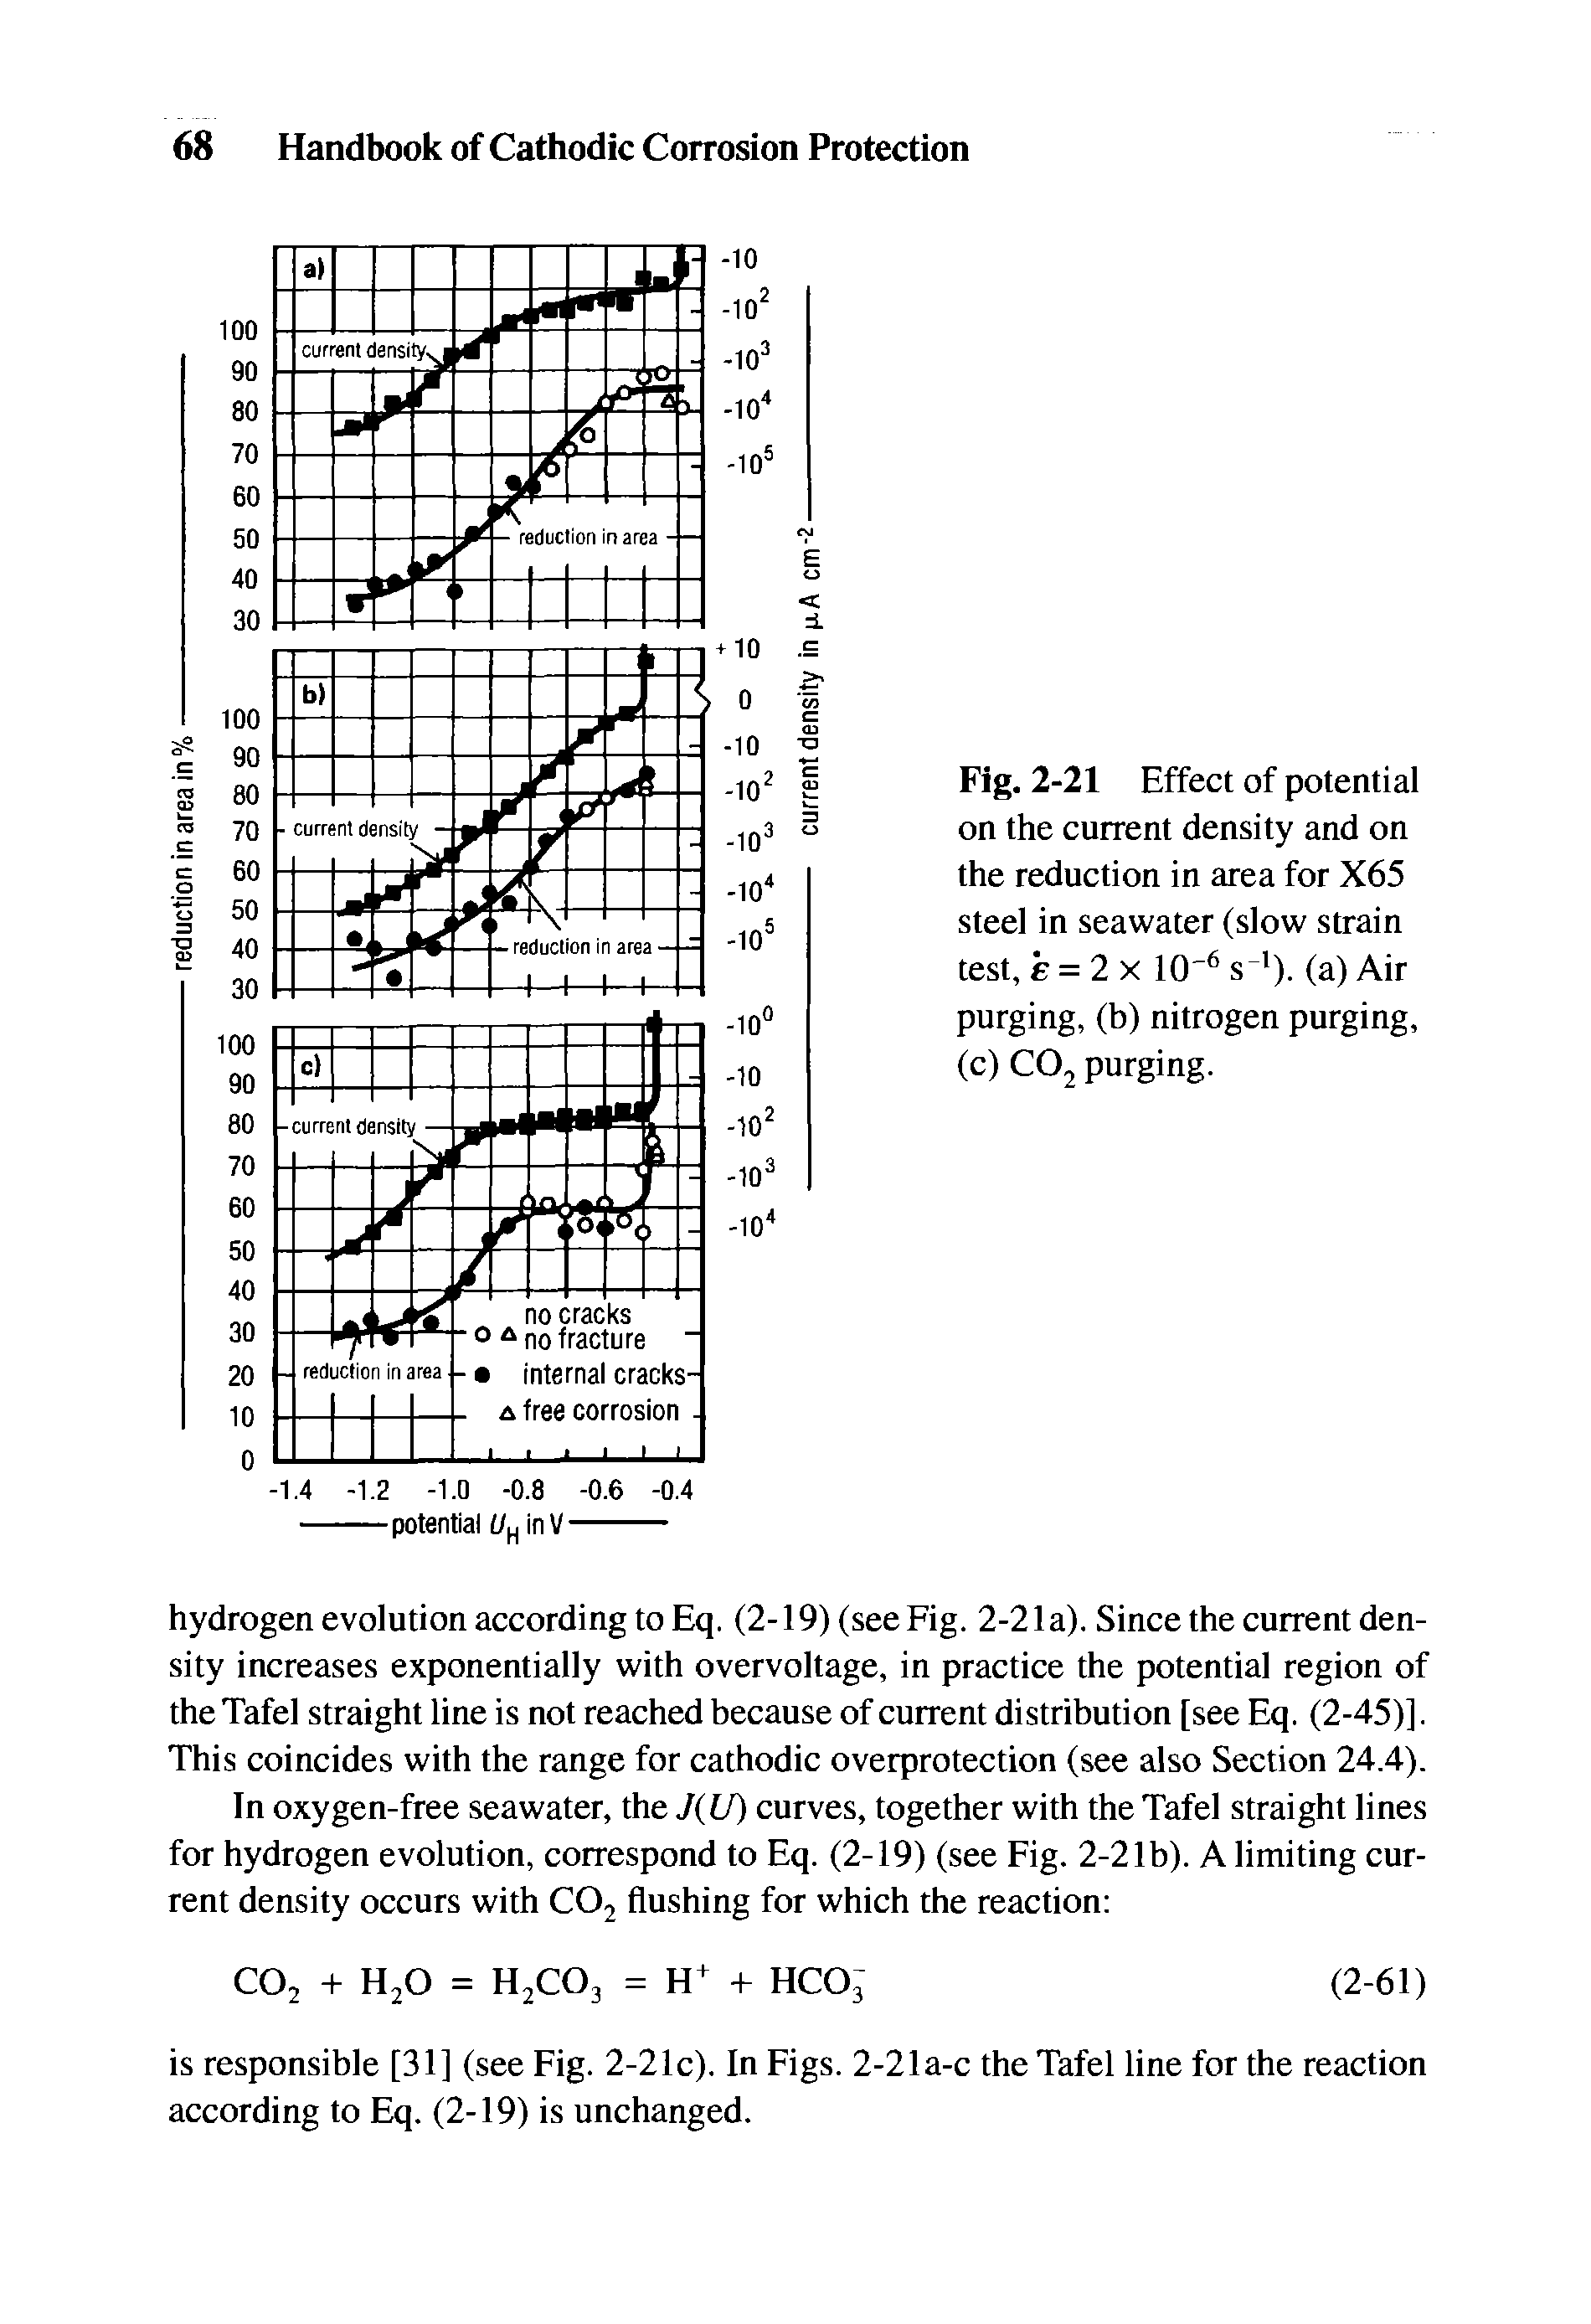 Fig. 2-21 Effect of potential on the current density and on the reduction in area for X65 steel in seawater (slow strain test, e = 2 X 10" s ), (a) Air purging, (h) nitrogen purging, (c) COj purging.